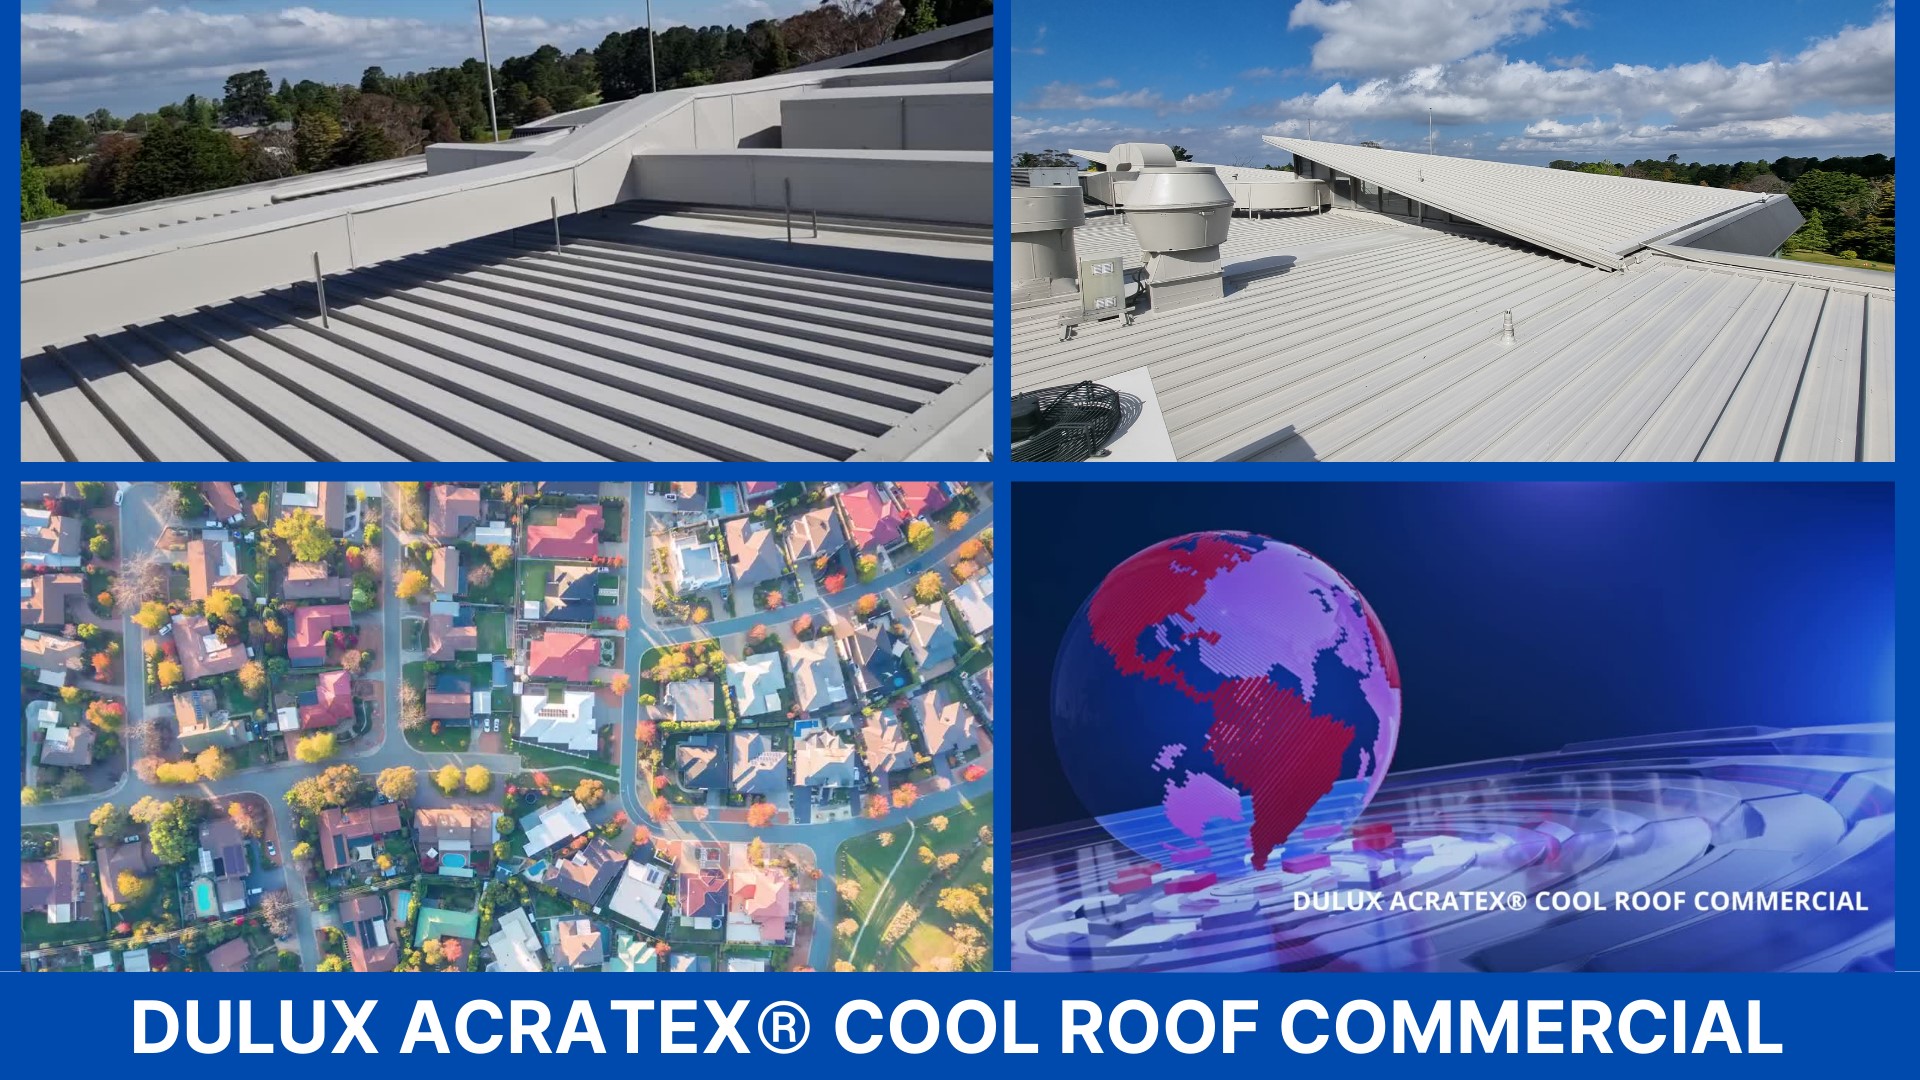 Heat Reflective Roof Paint Coatings for Cooler Homes Sydney by Duravex Roofing